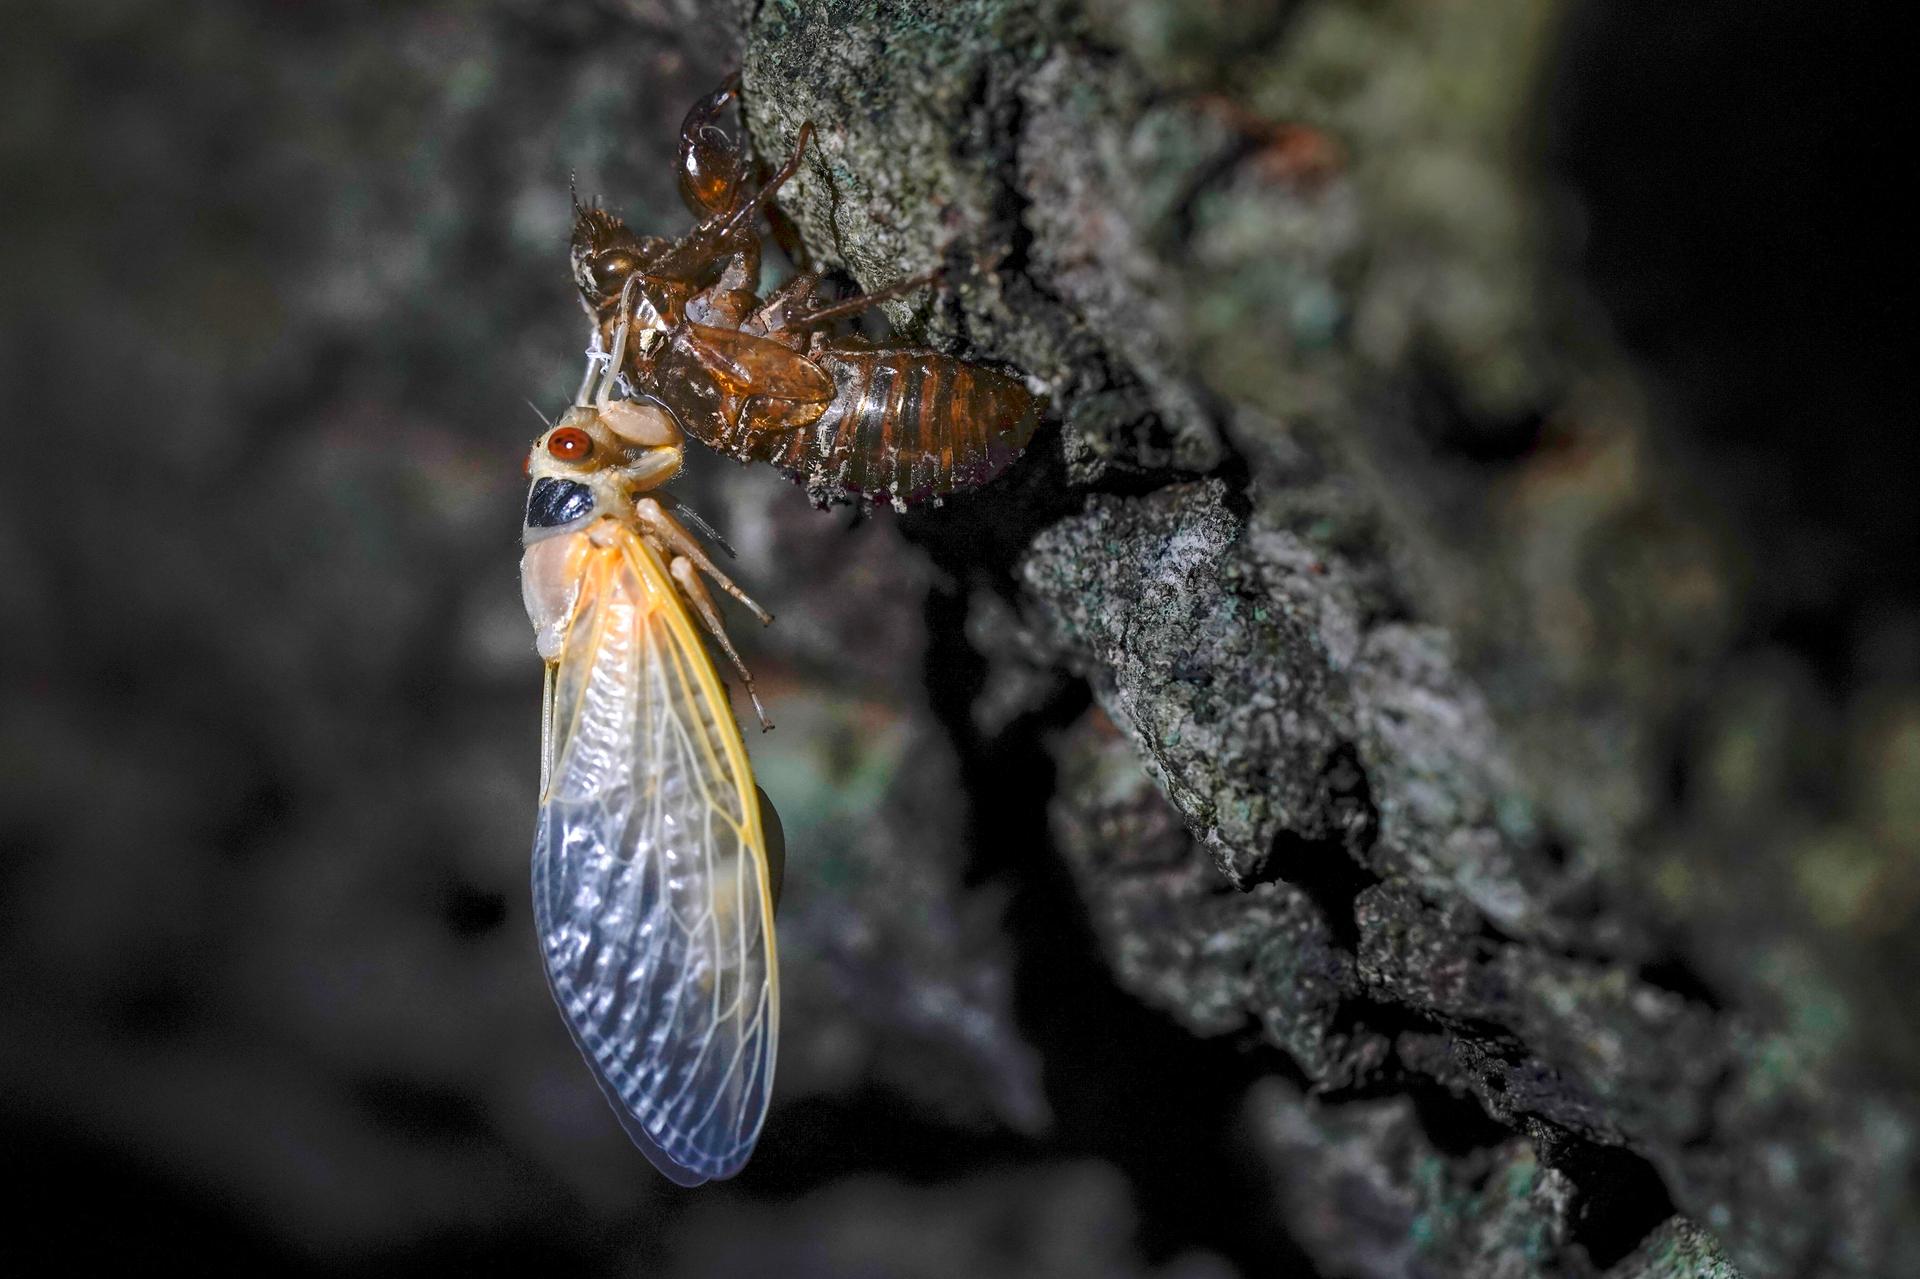 An adult cicada rests after shedding its nymphal skin, on the bark of an an oak tree early Wednesday, May 5, 2021, on the University of Maryland campus in College Park, Maryland.